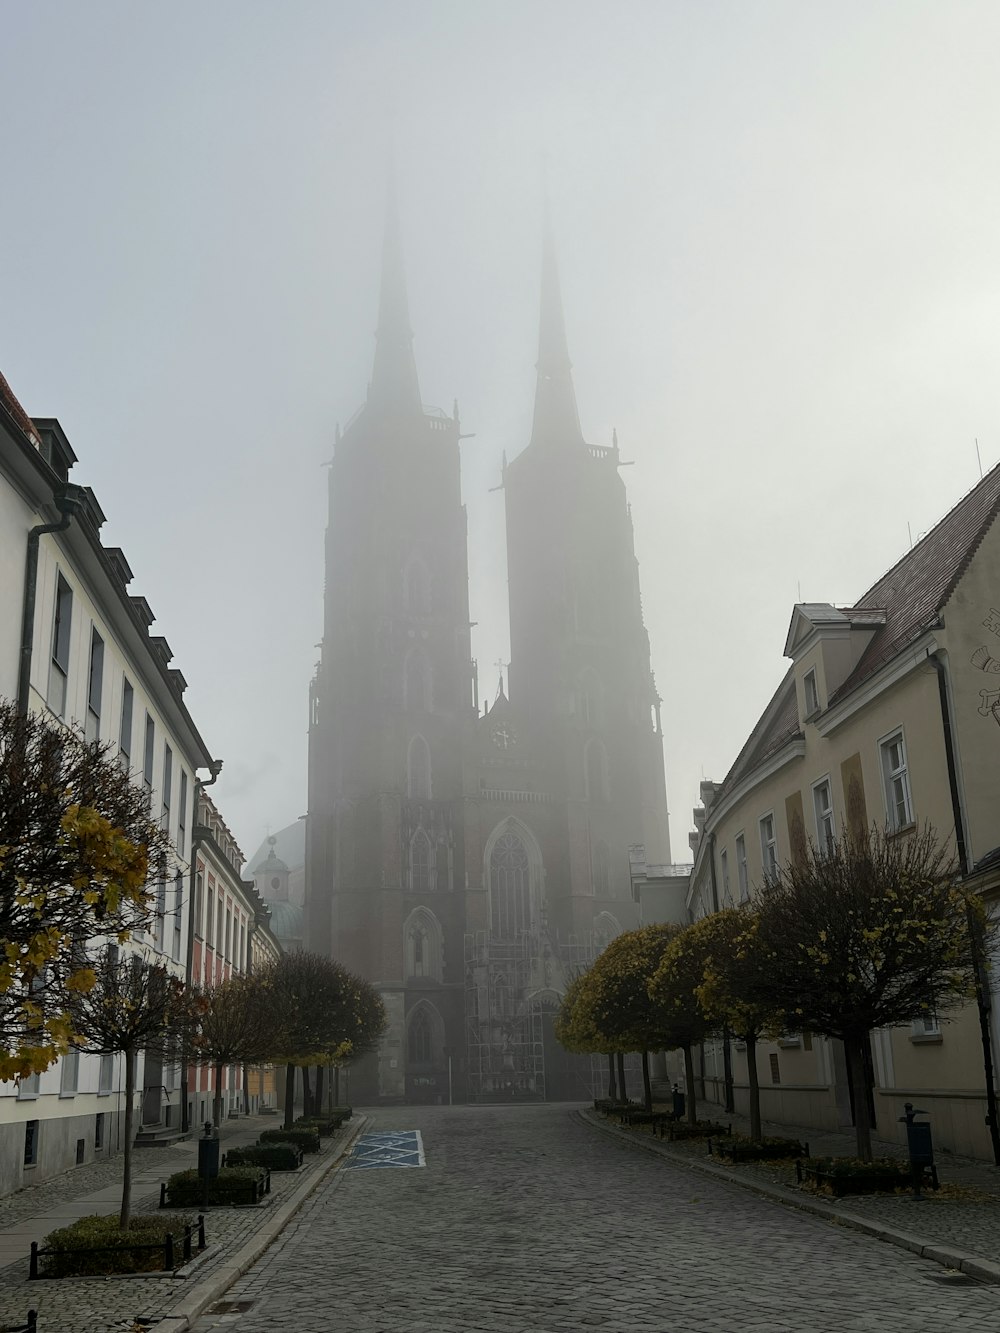 a large cathedral towering over a city on a foggy day